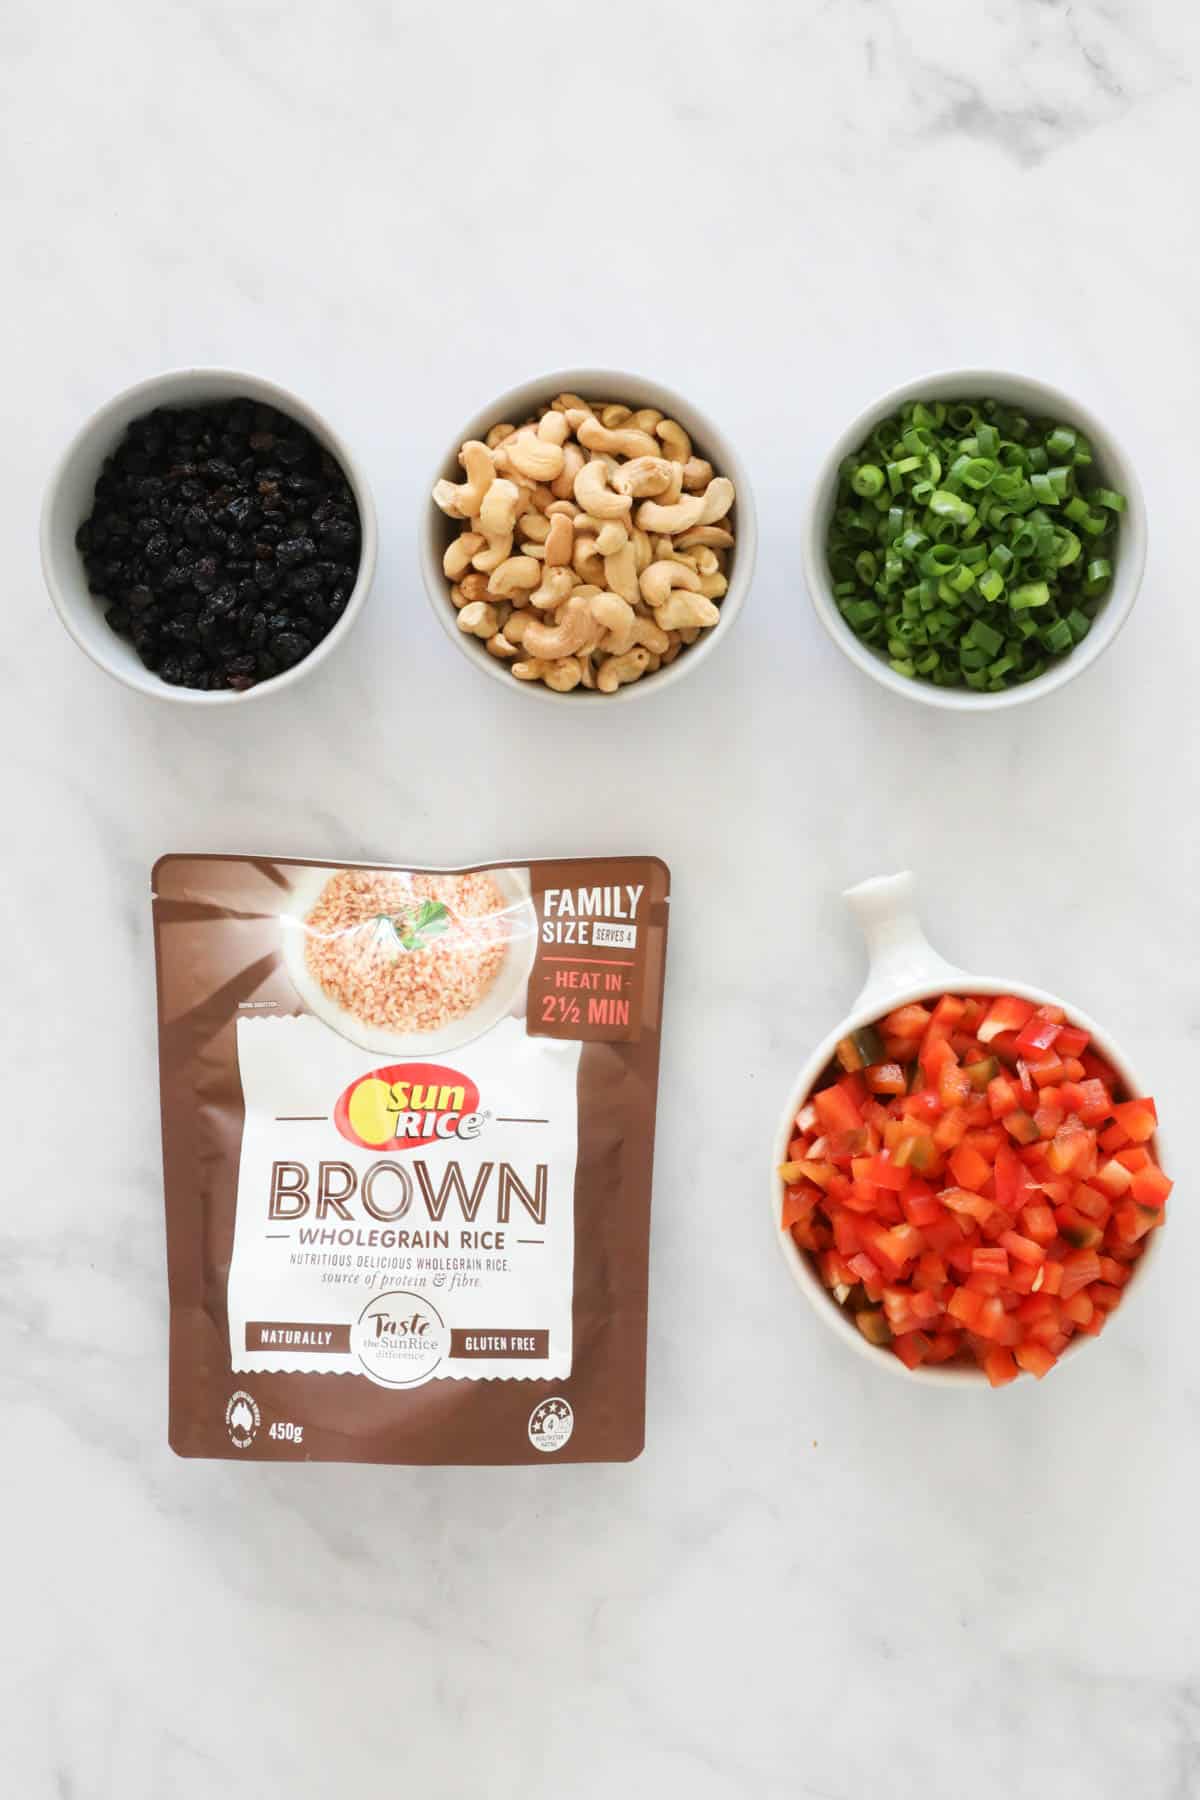 Ingredients needed to make the brown rice salad weighed out and placed in individual bowls.